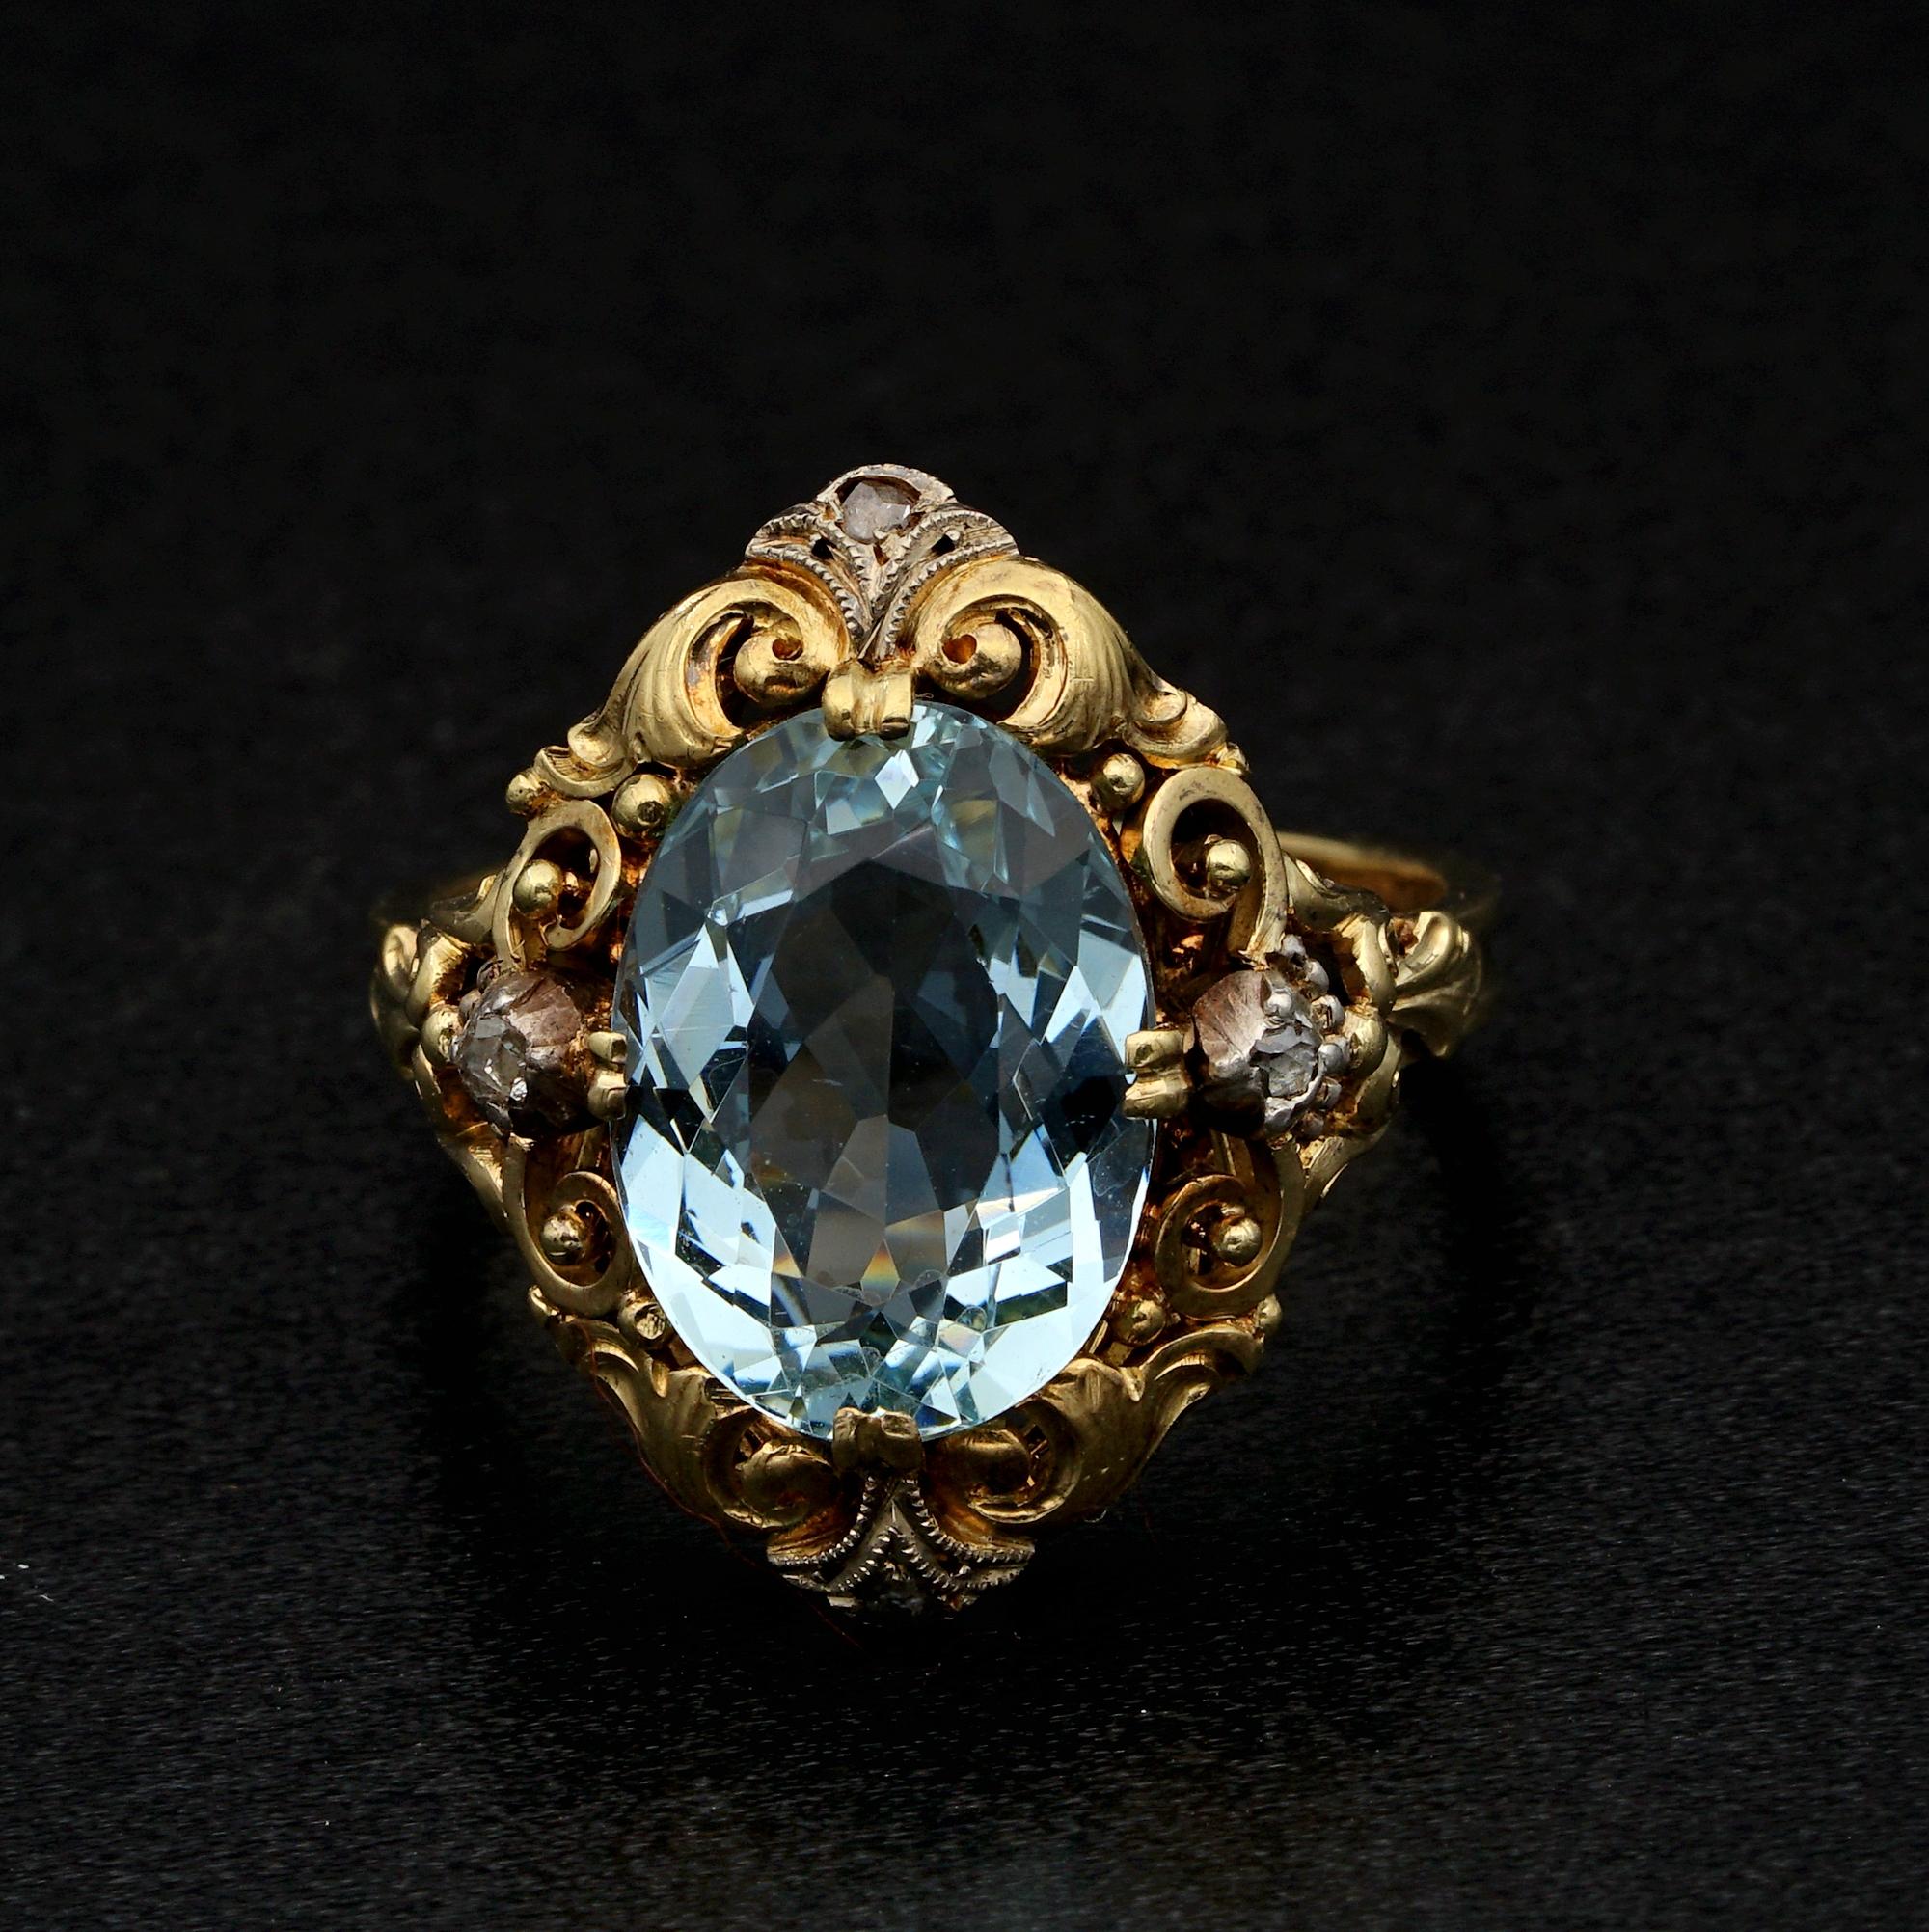 Framed Sky
This authentic Edwardian ring is epitome of elegance
Exquisitely hand crafted mounting with gorgeous motifs in vogue at the time make the frame to the fantastic Aquamarine known to be totally Natural untreated 4.70 CT oval faceted